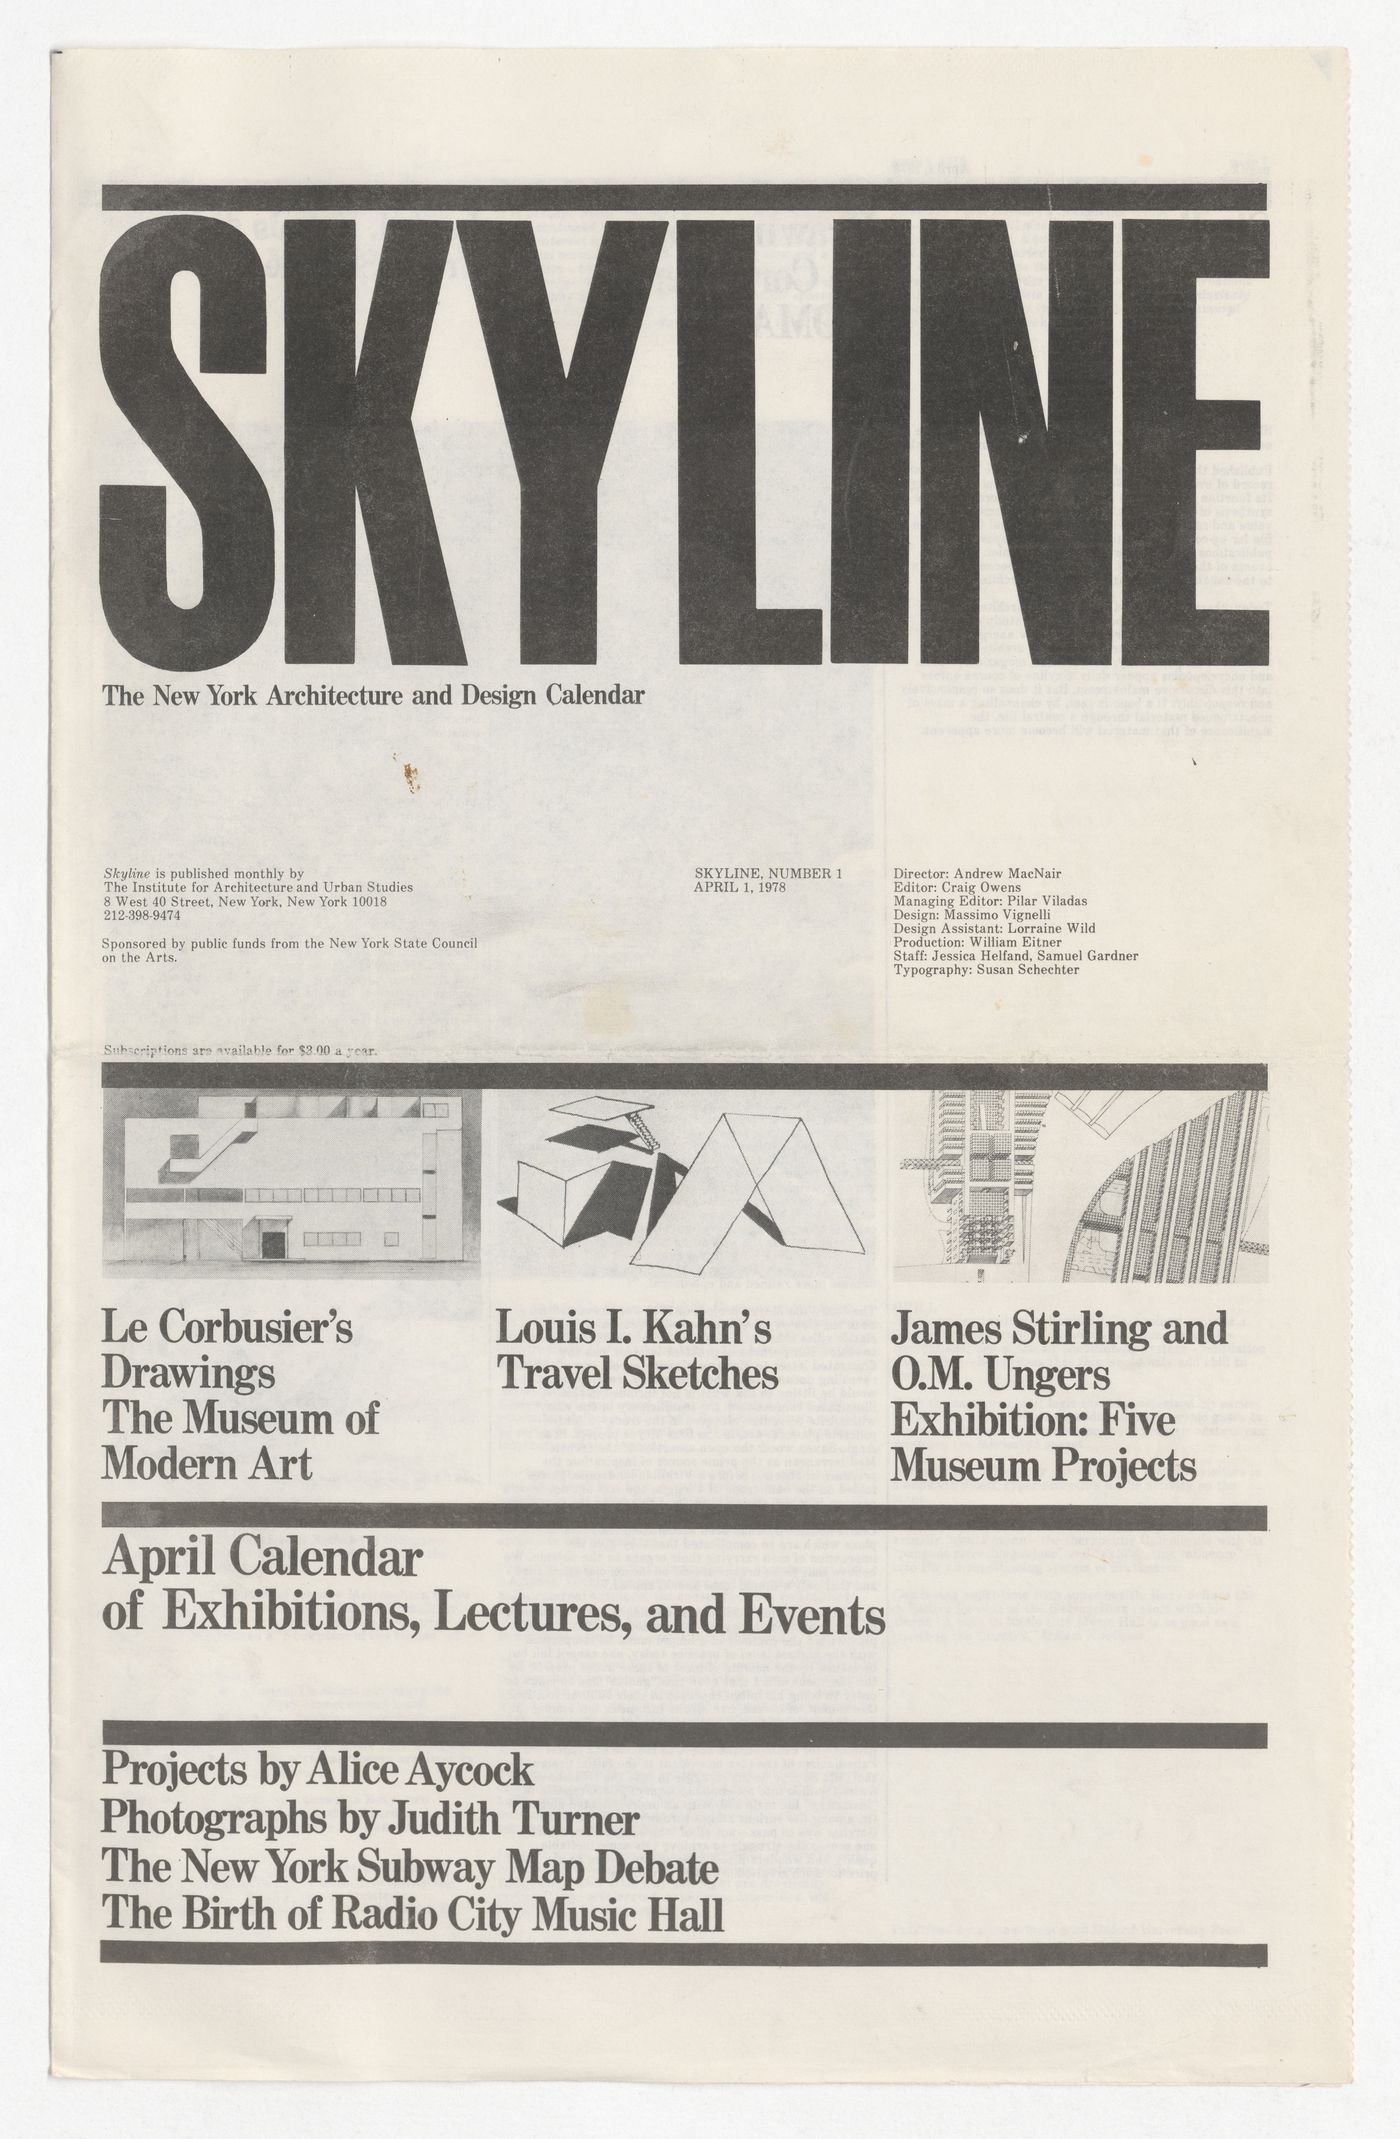 Incomplete issue of Skyline no 1